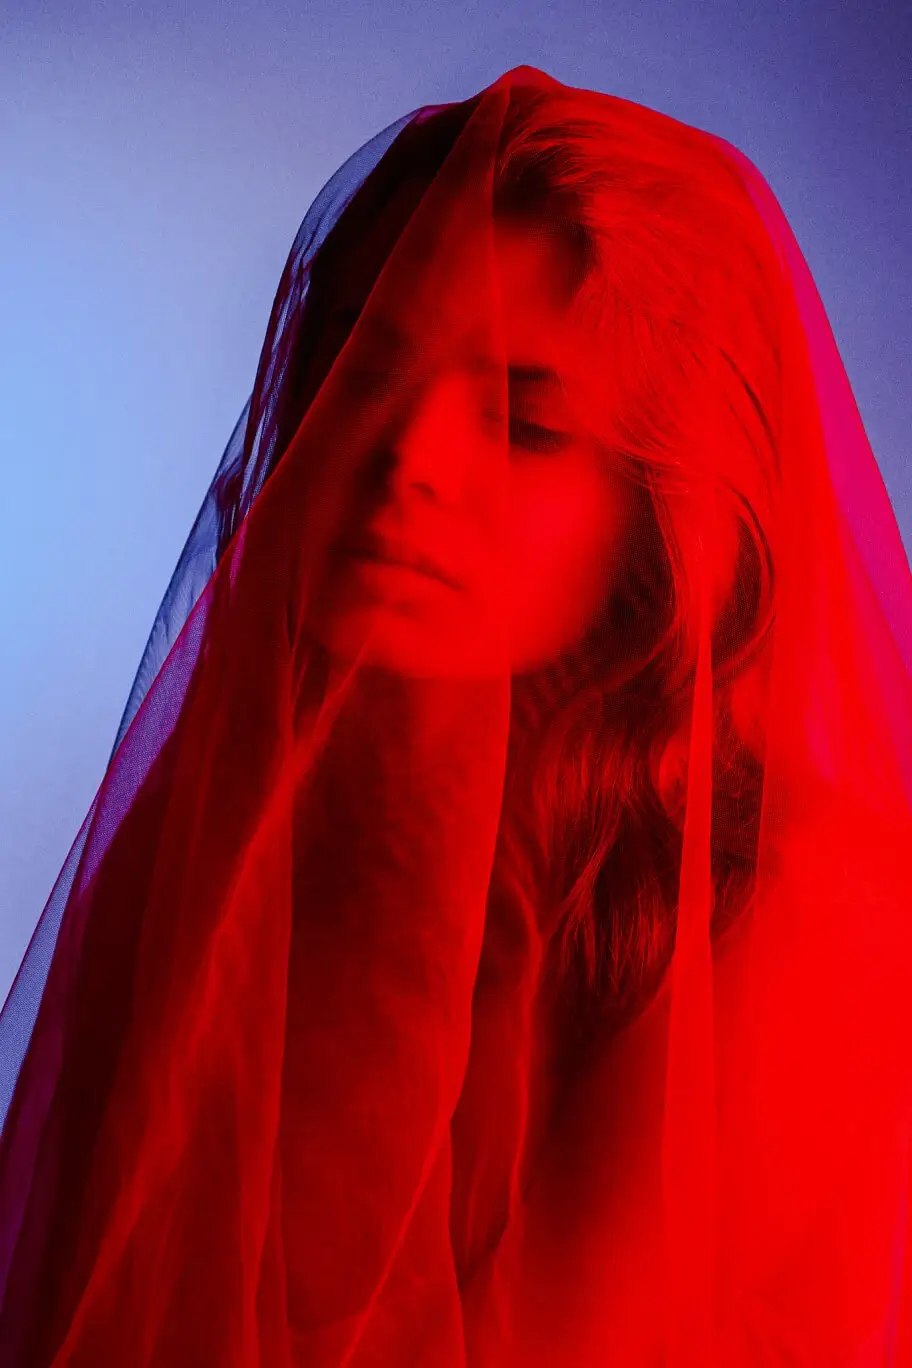 Portrait of a woman shrouded in a red veil with a contrasting blue background.